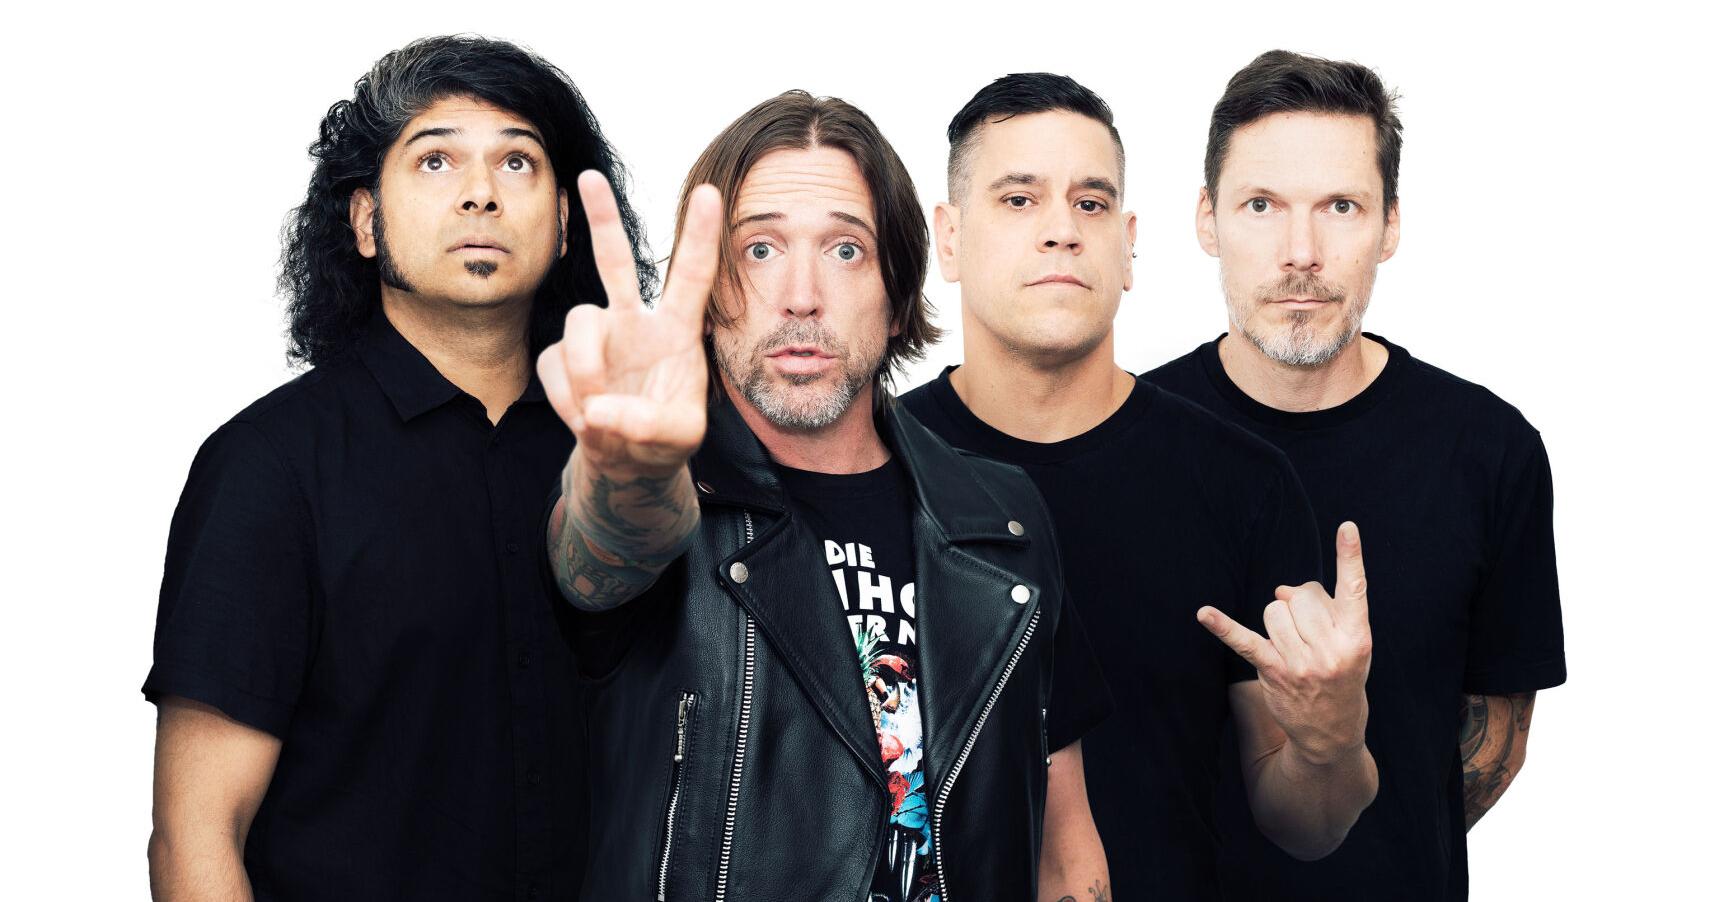 Billy Talent coming to Penticton